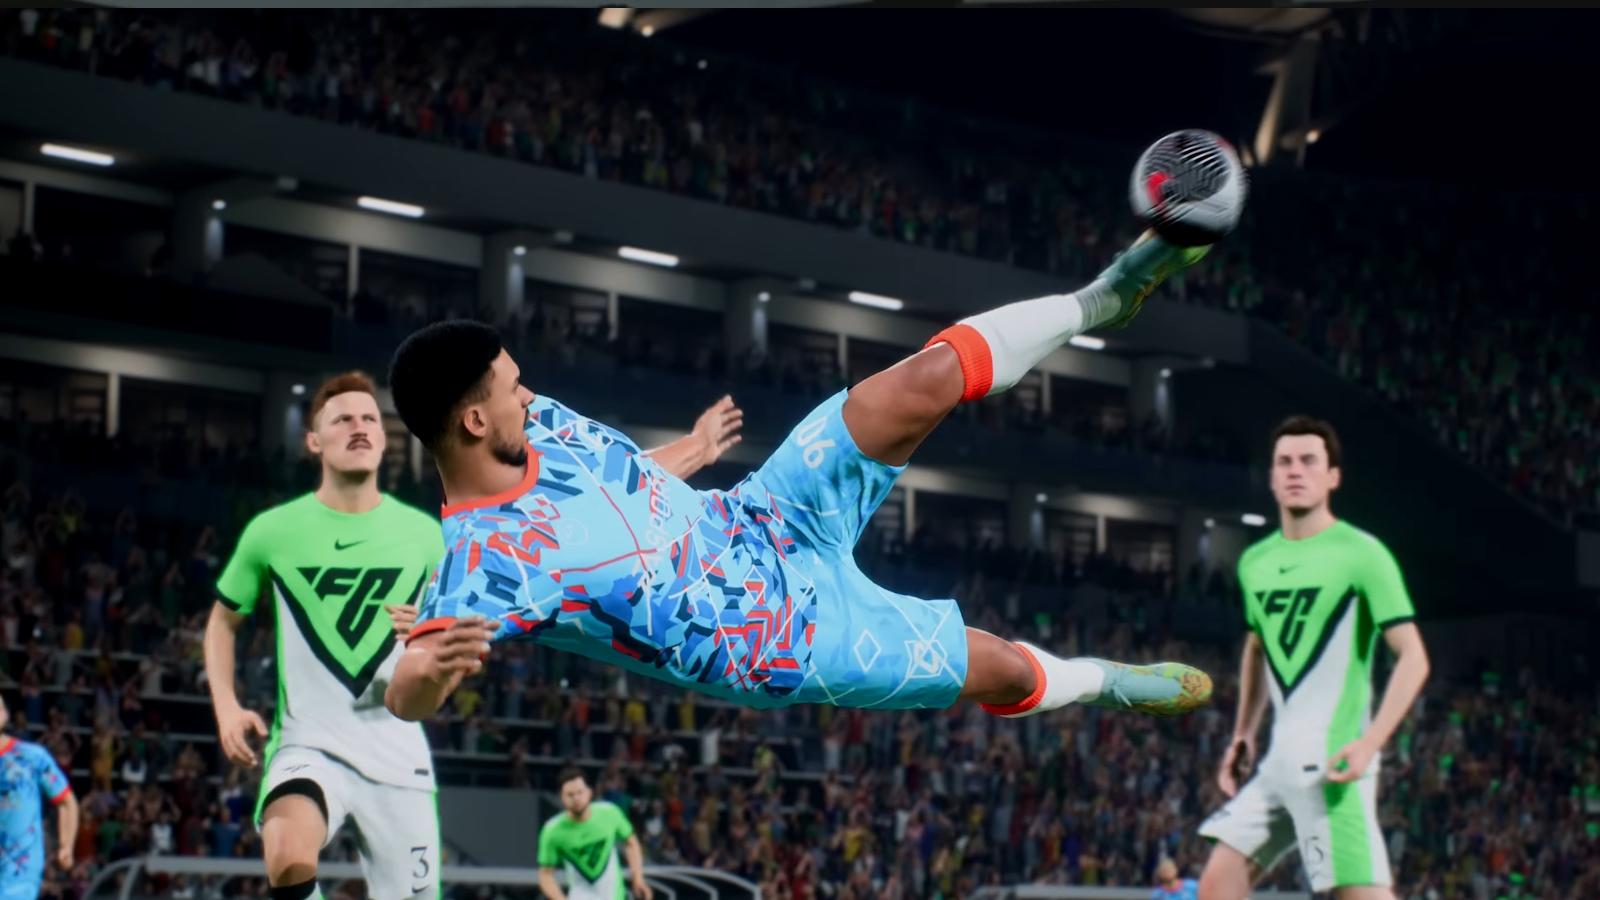 Clubs player with Acrobatic performing overhead volley in EA FC 24.